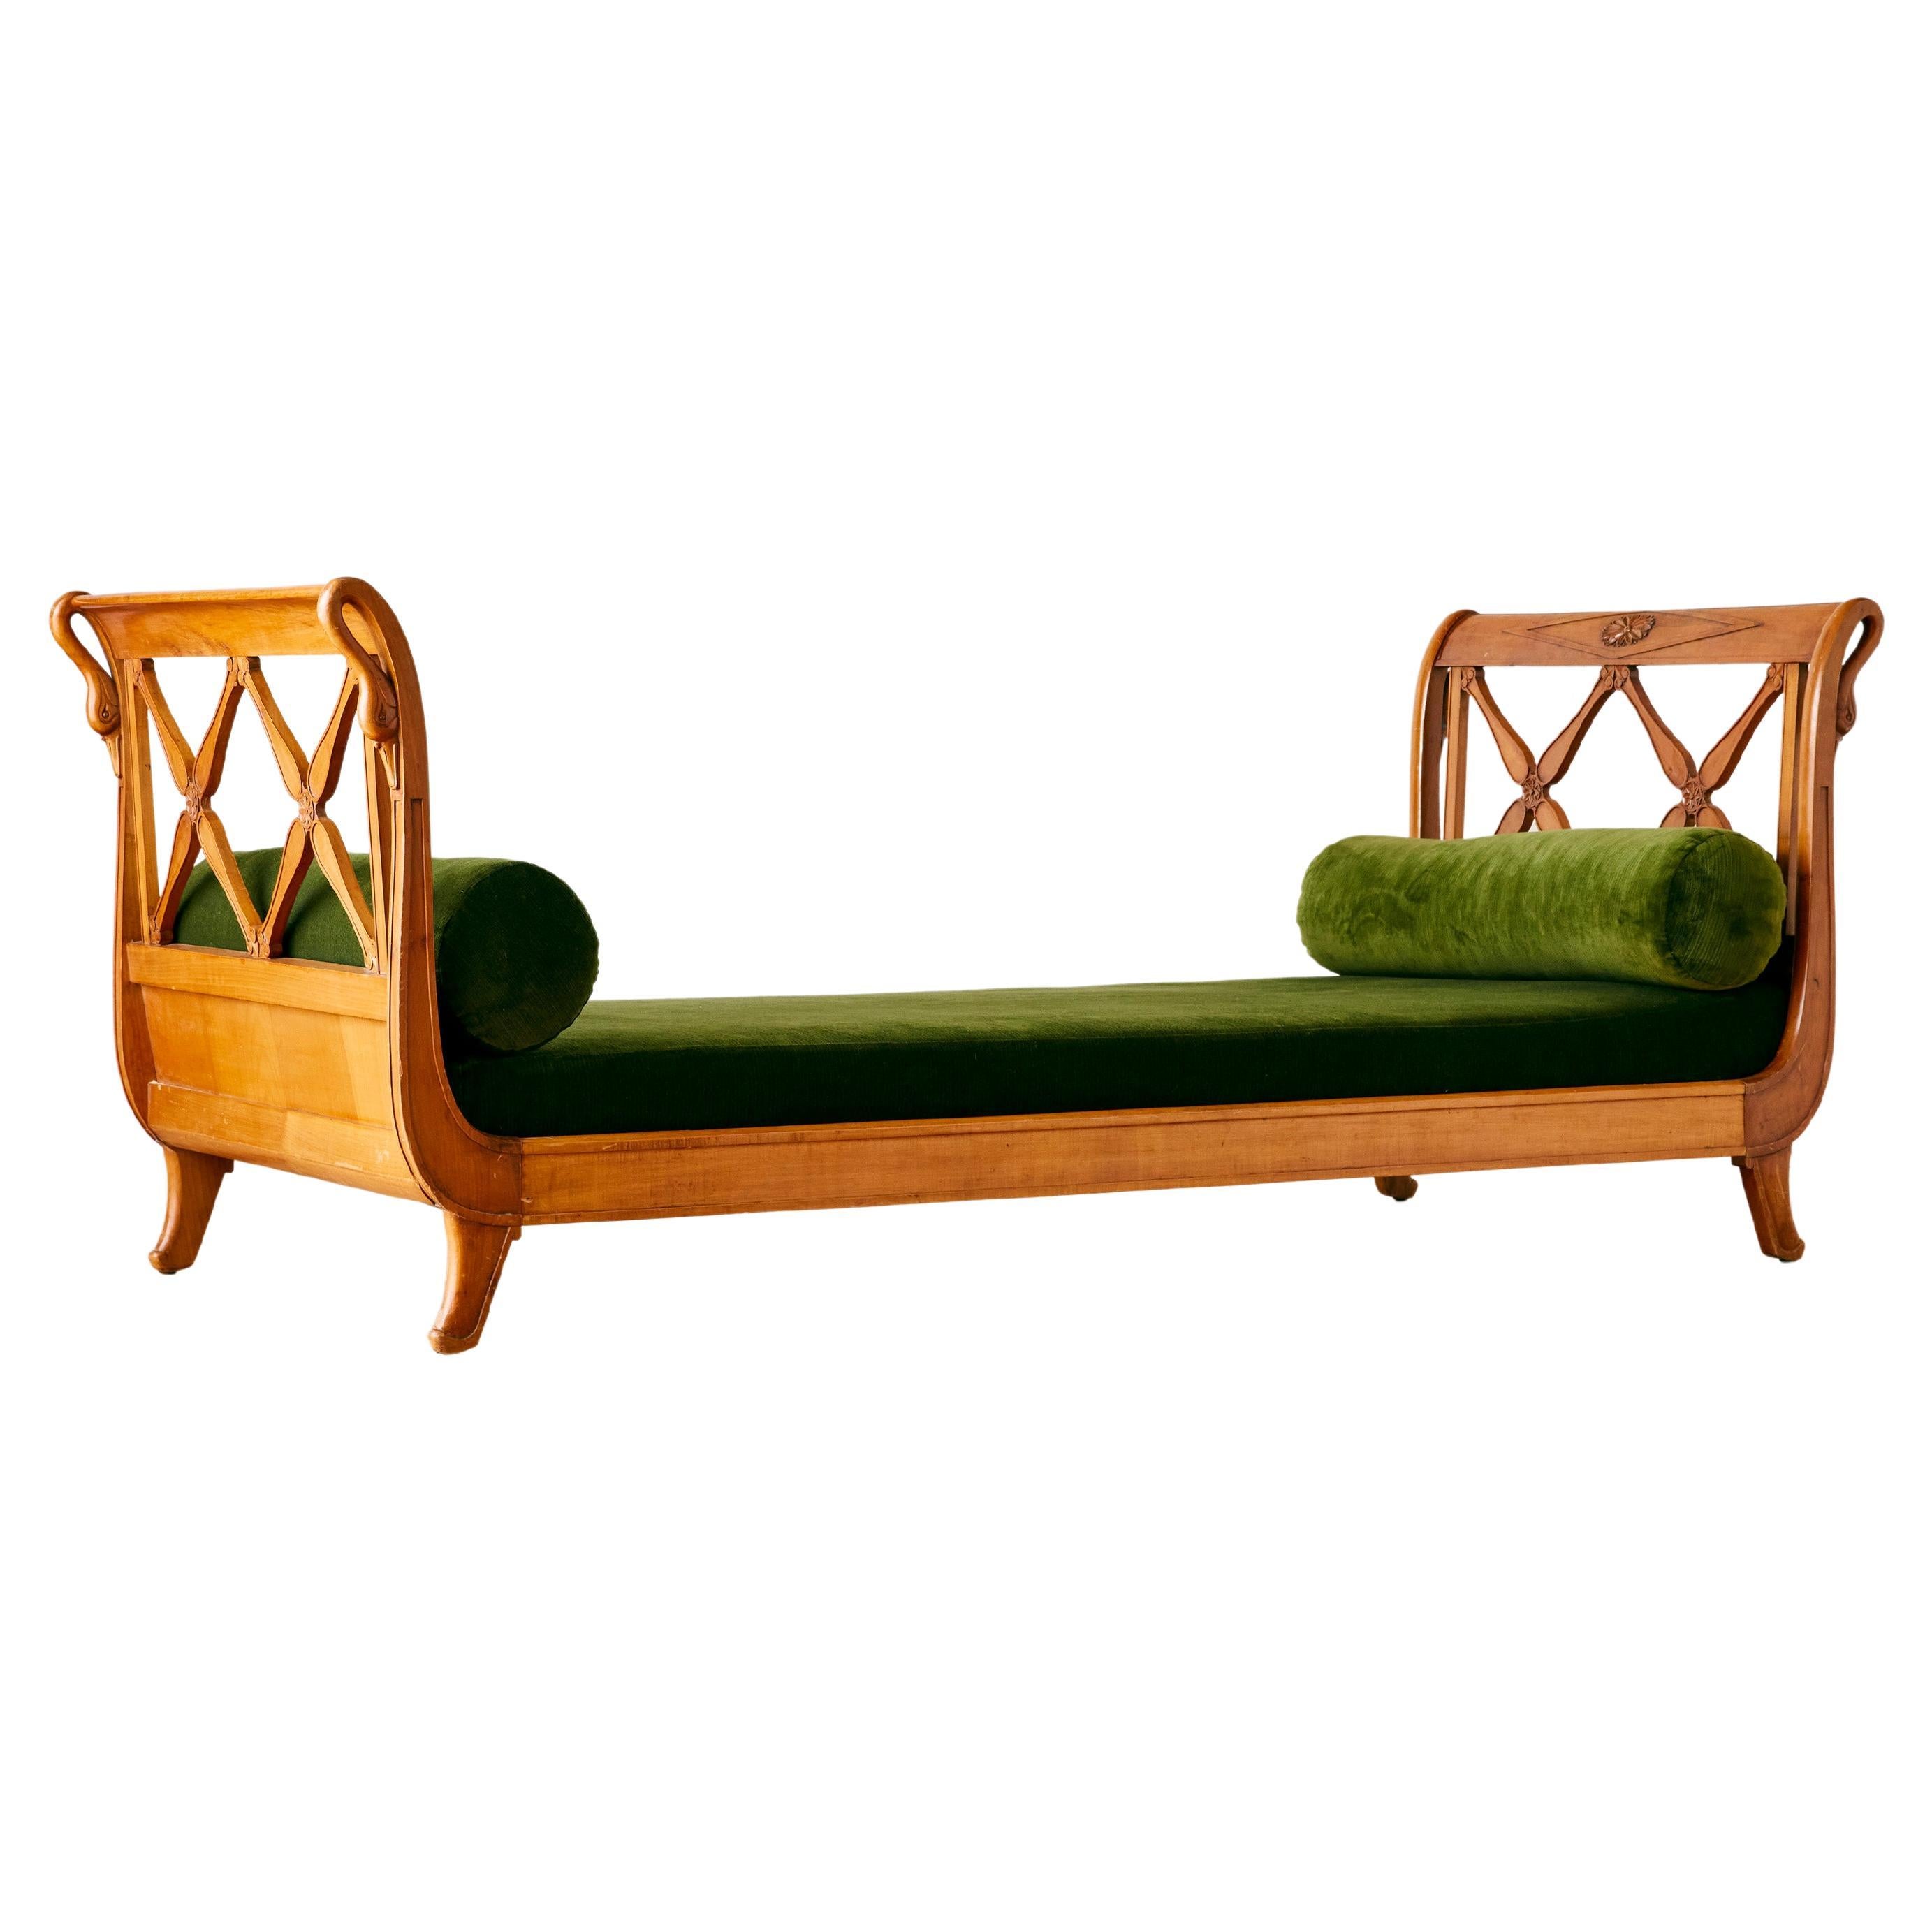 French Carved Daybed With Swan Details C. 1930